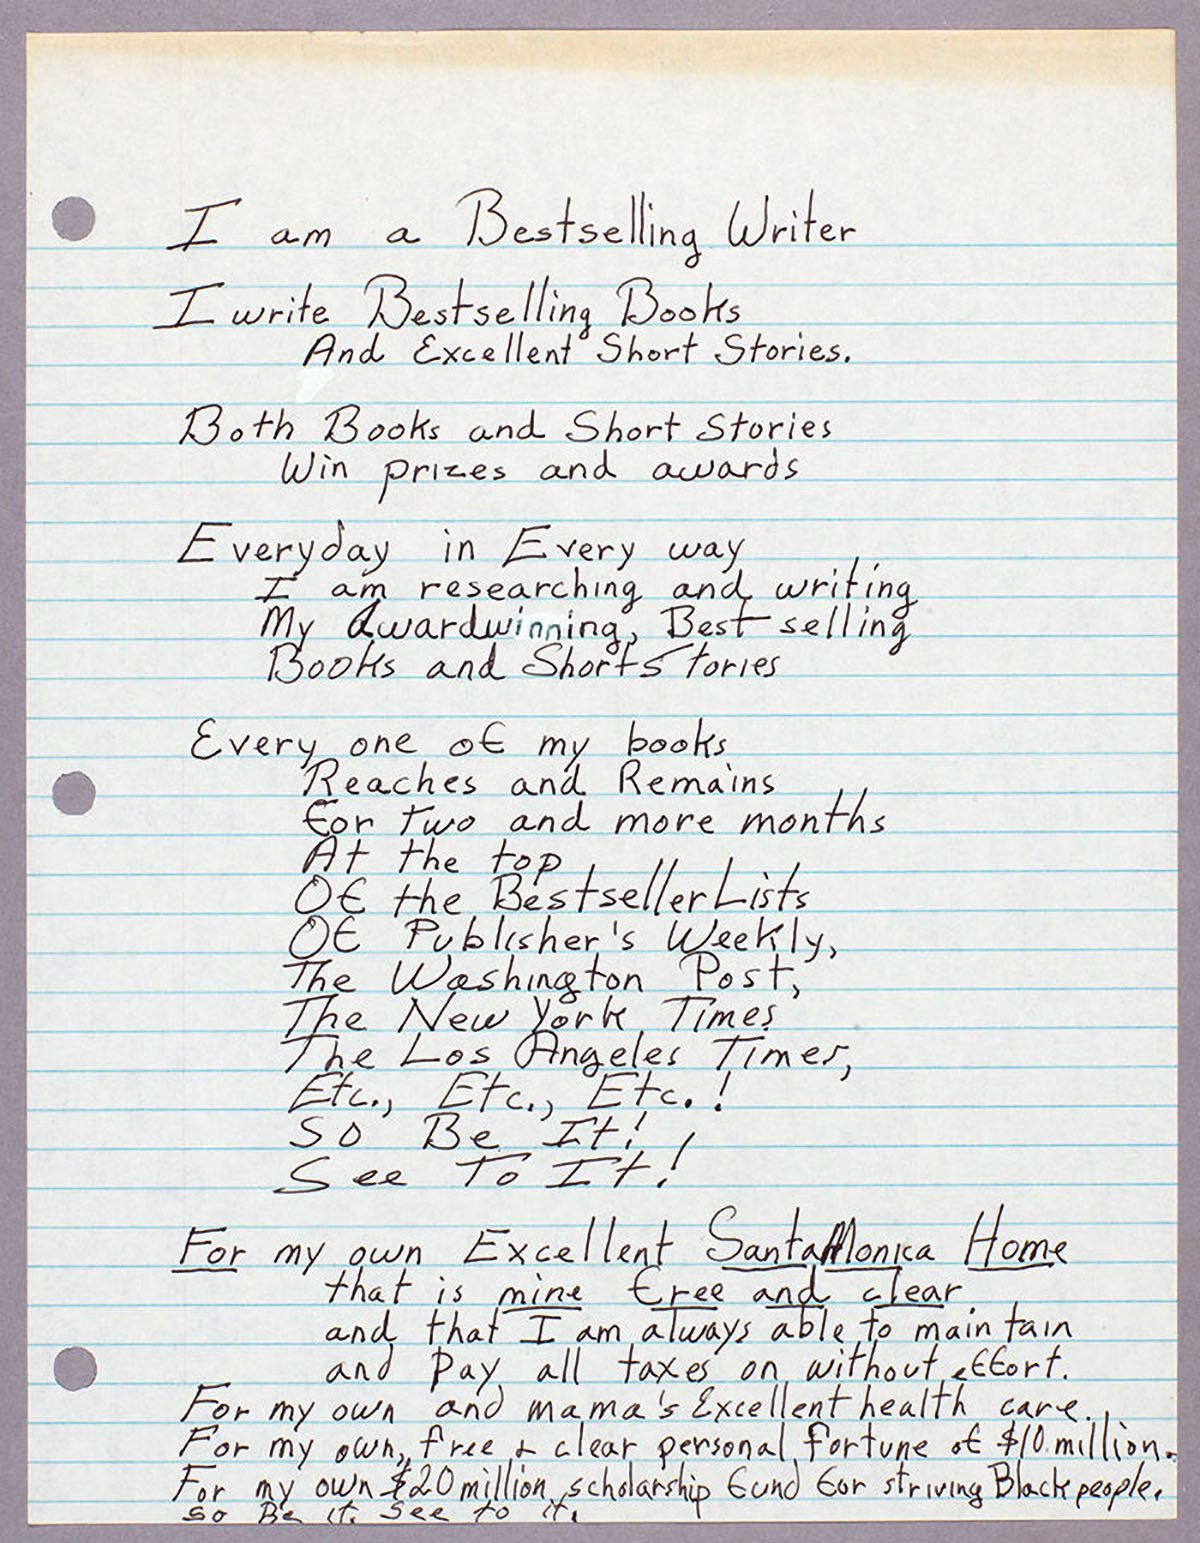 A page of handwritten affirmations that Butler wrote for herself as an adult in which she includes her hope of becoming a bestselling author.